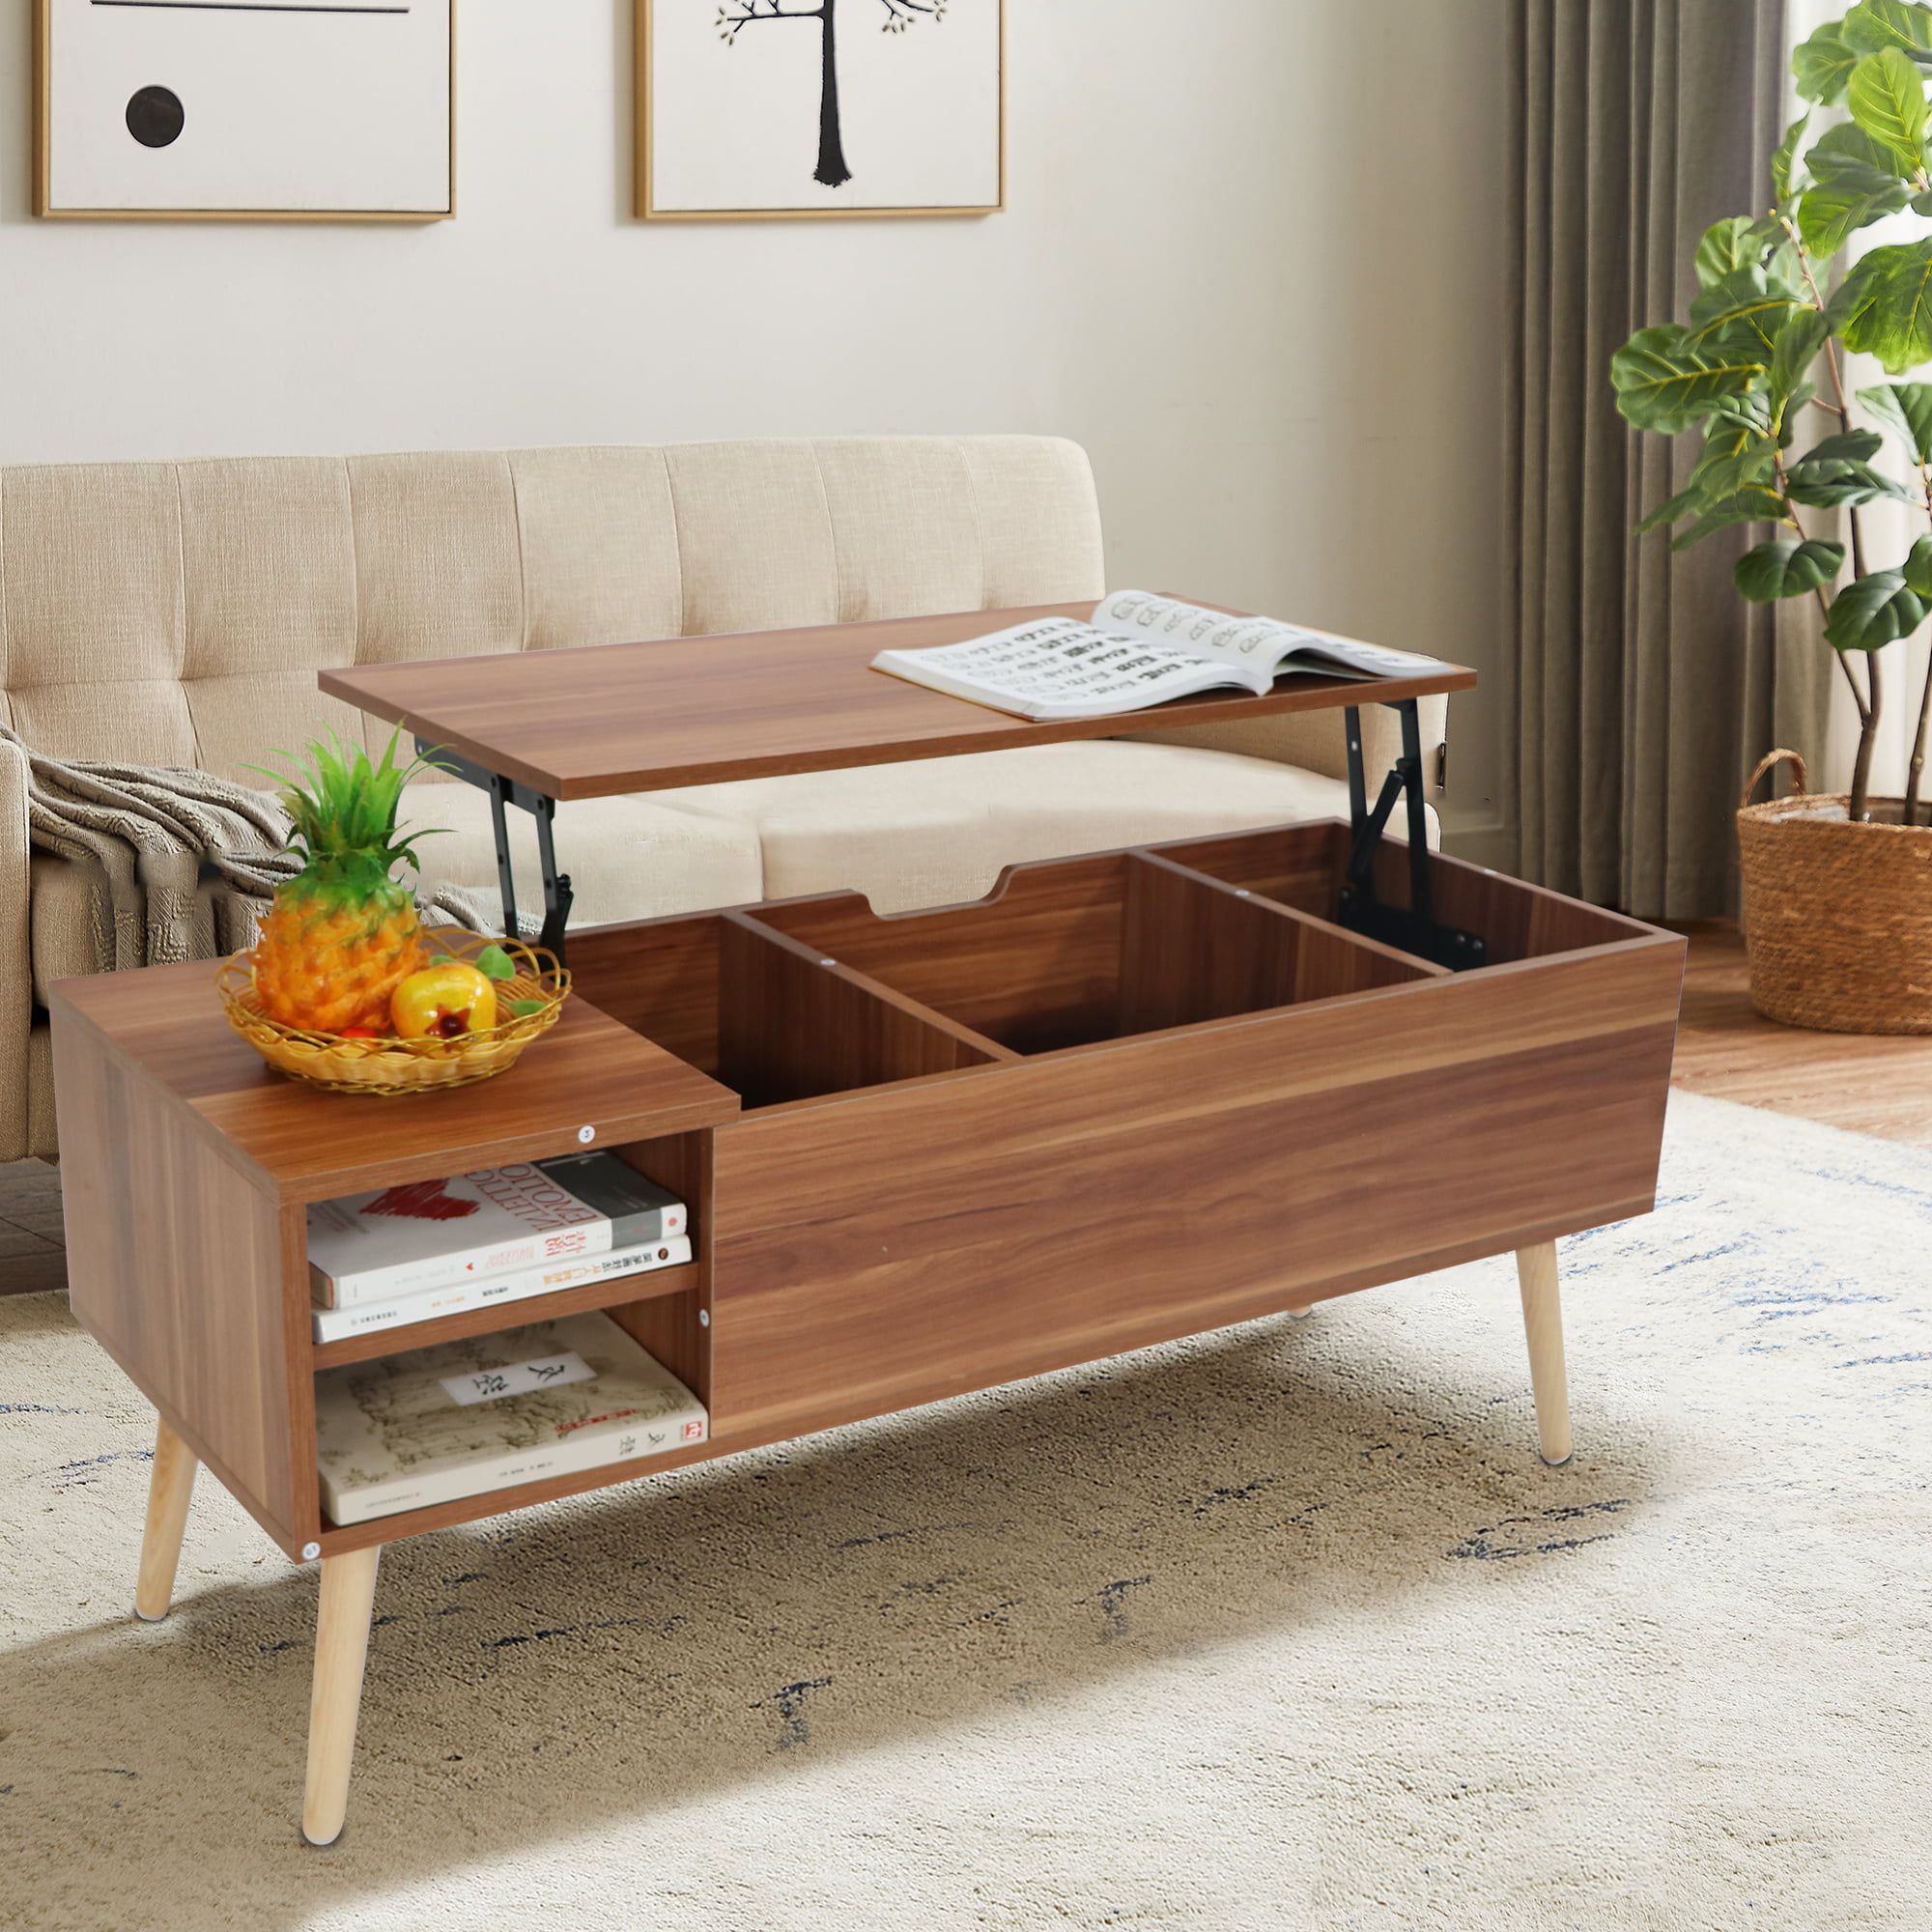 Aukfa Mid Century Modern Wooden Lift Top Coffee Table, Rosewood –  Walmart With Regard To Lift Top Coffee Tables With Storage Drawers (View 3 of 15)